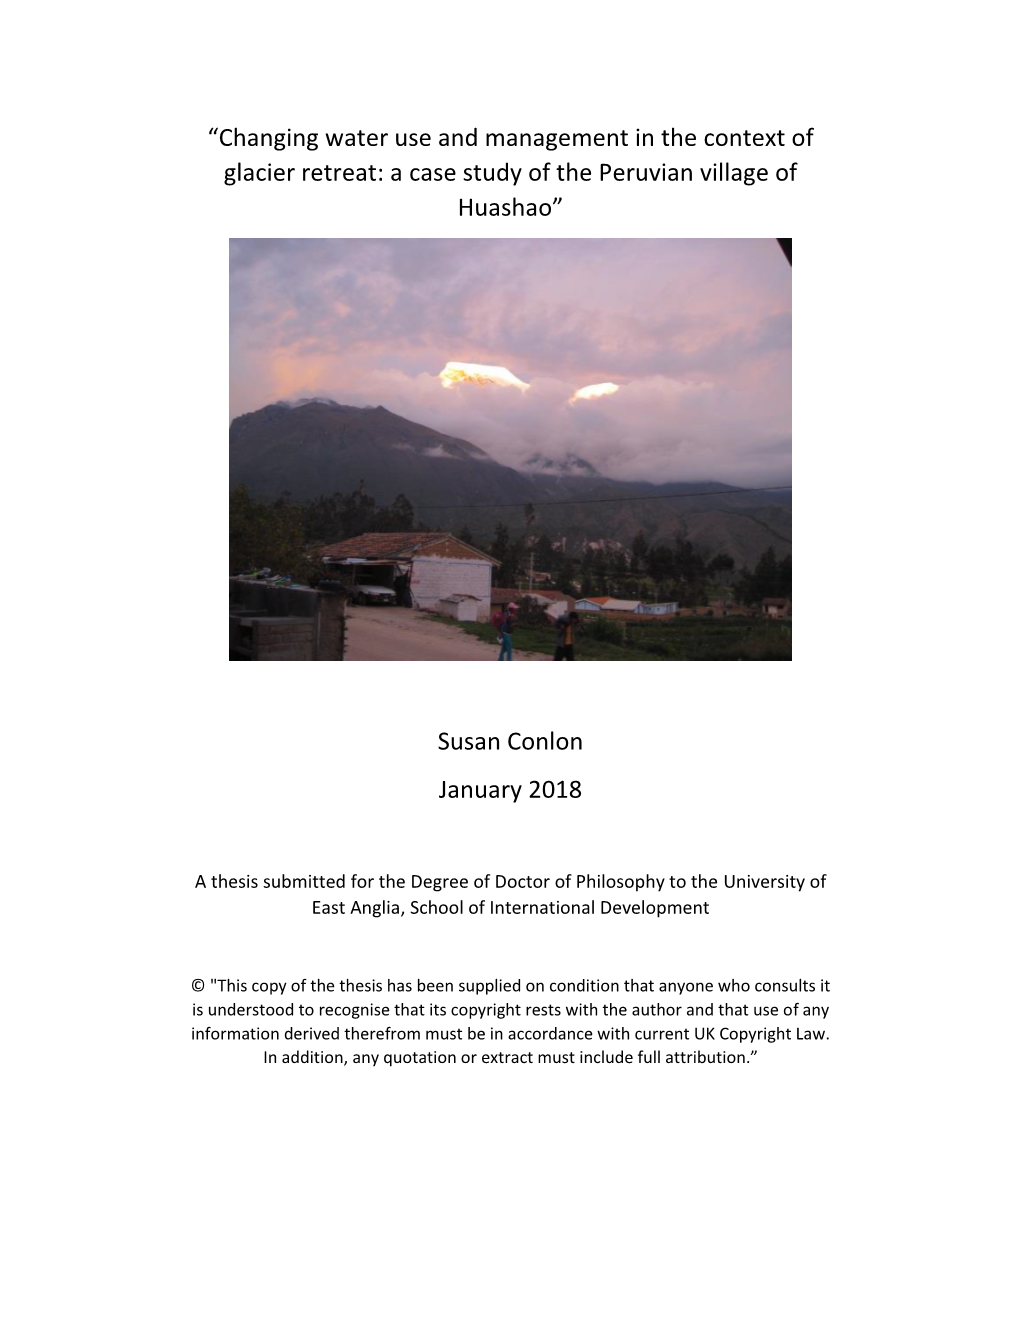 Changing Water Use and Management in the Context of Glacier Retreat: a Case Study of the Peruvian Village of Huashao”